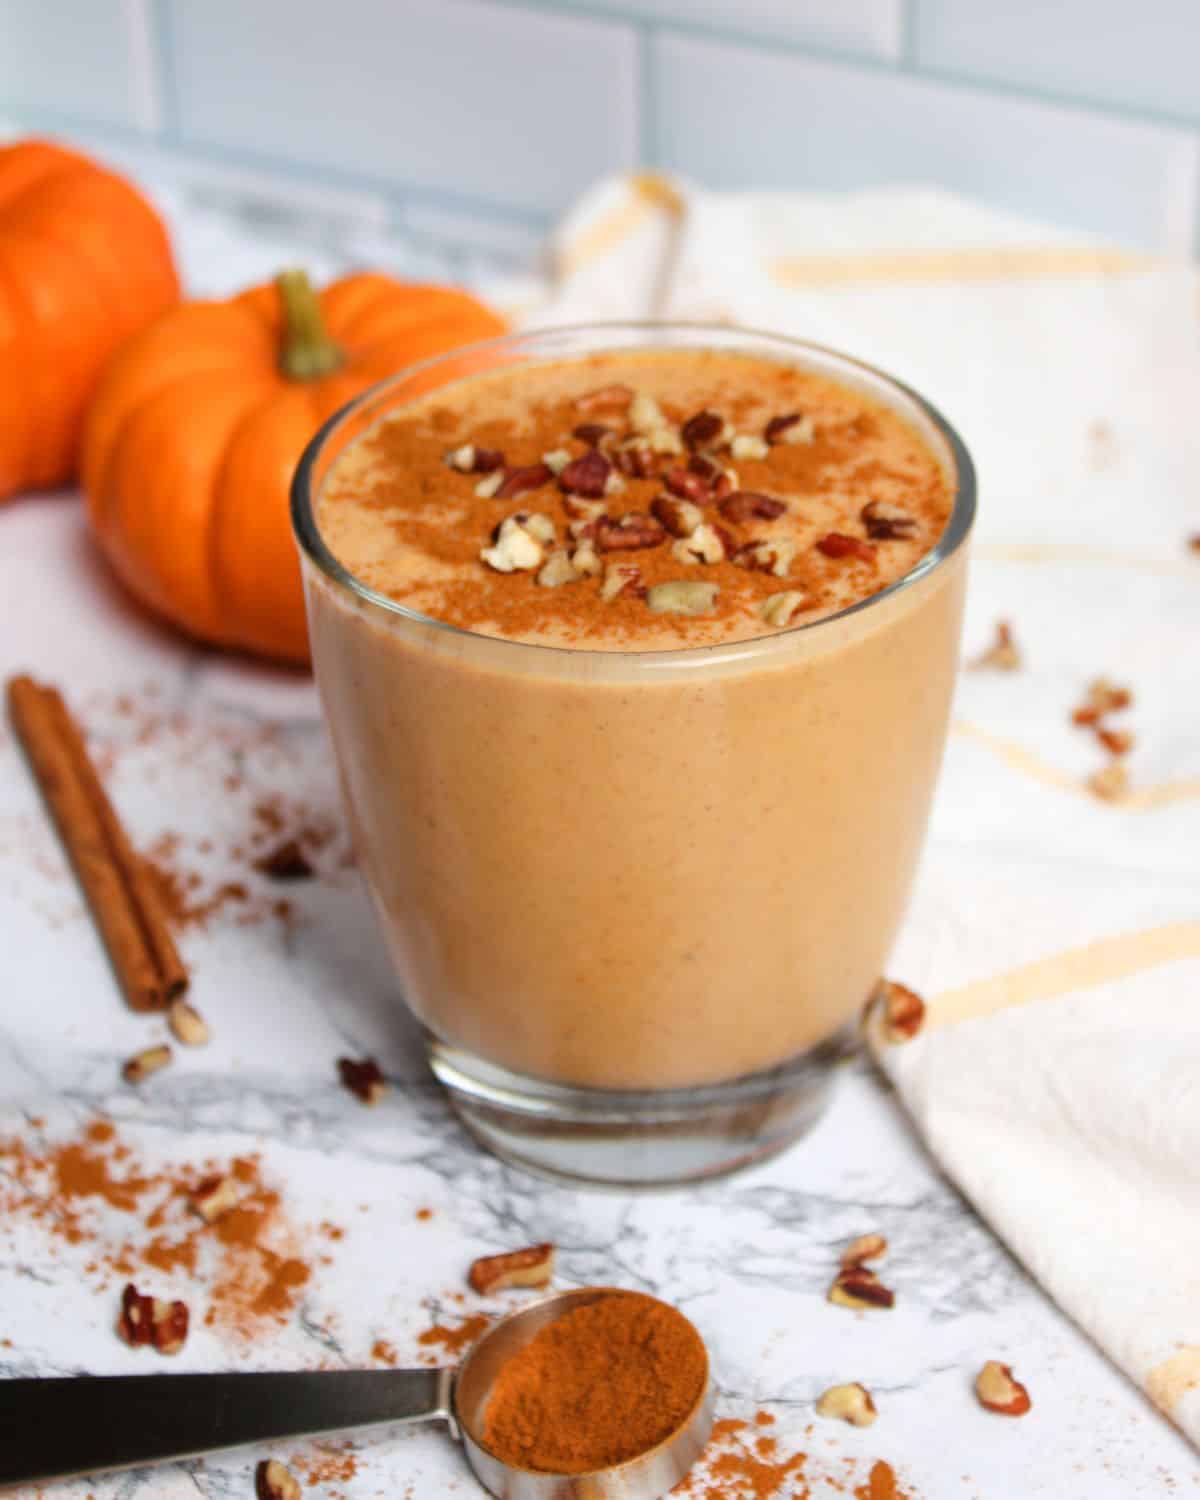 Pumpkin smoothie in a glass on a countertop with pumpkins and cinnamon sticks in the background.